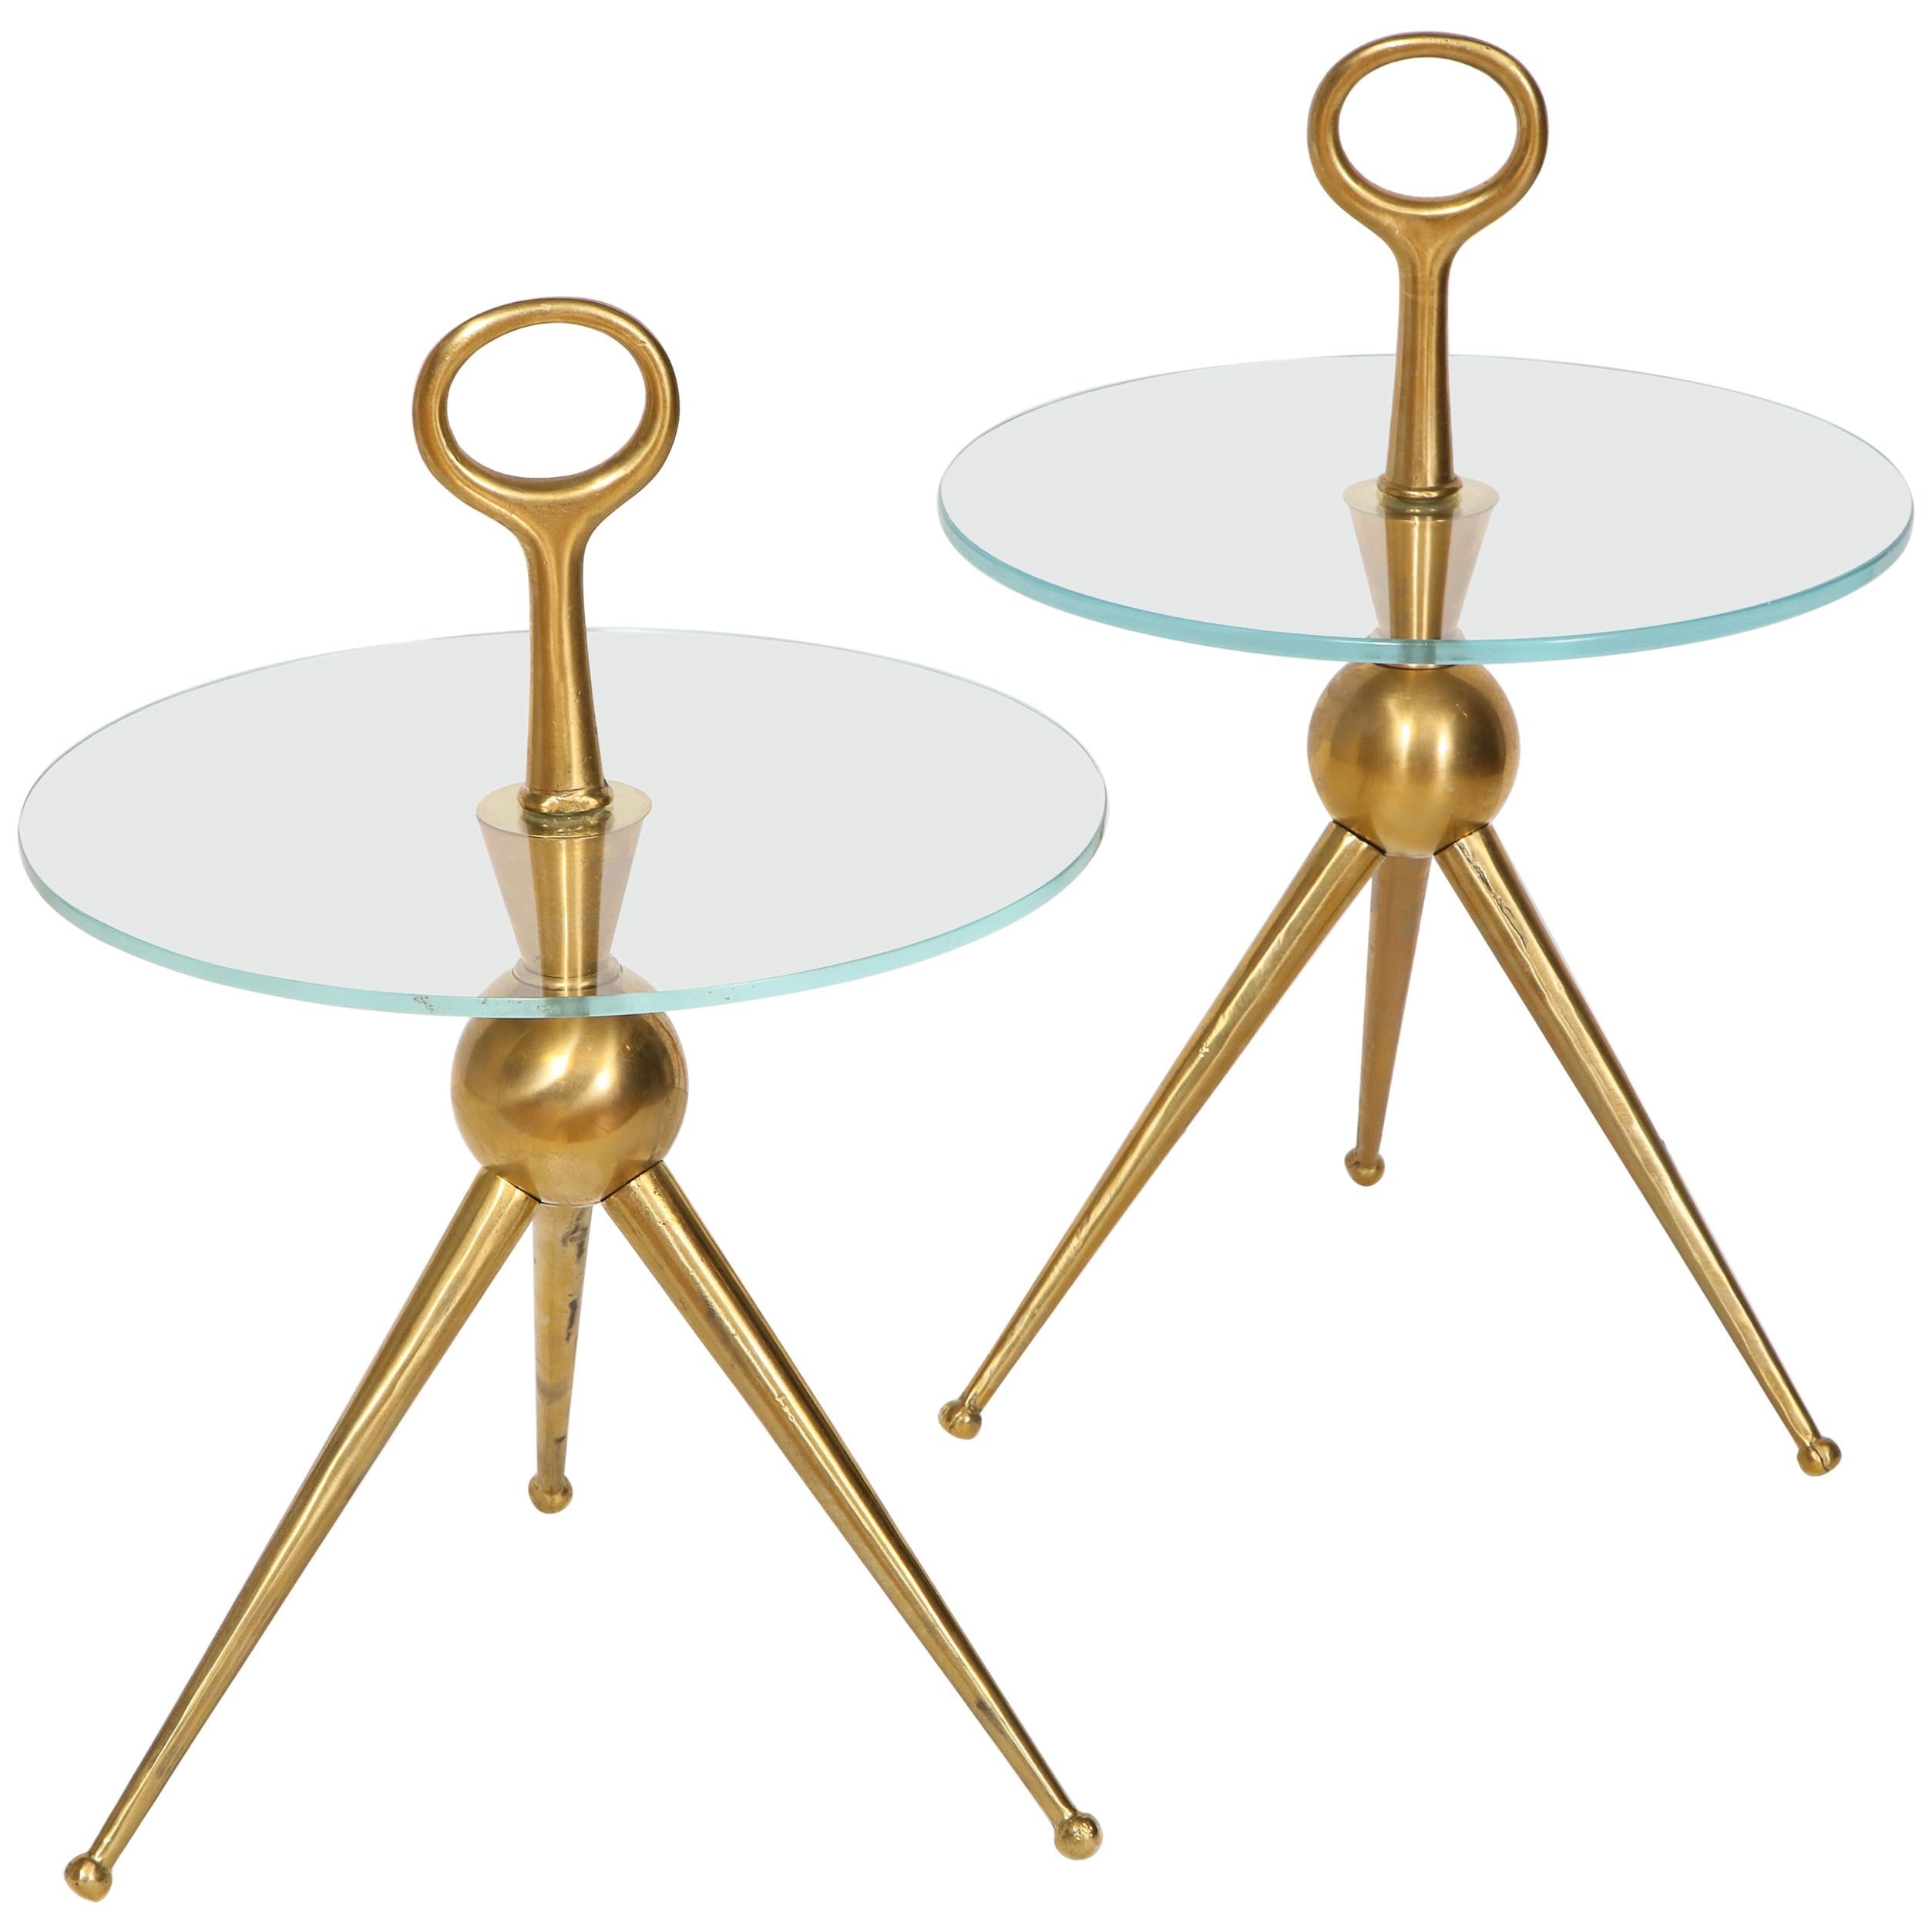 Pair of Handcrafted Bronze and Glass Tripod Martini Side Tables, Italy